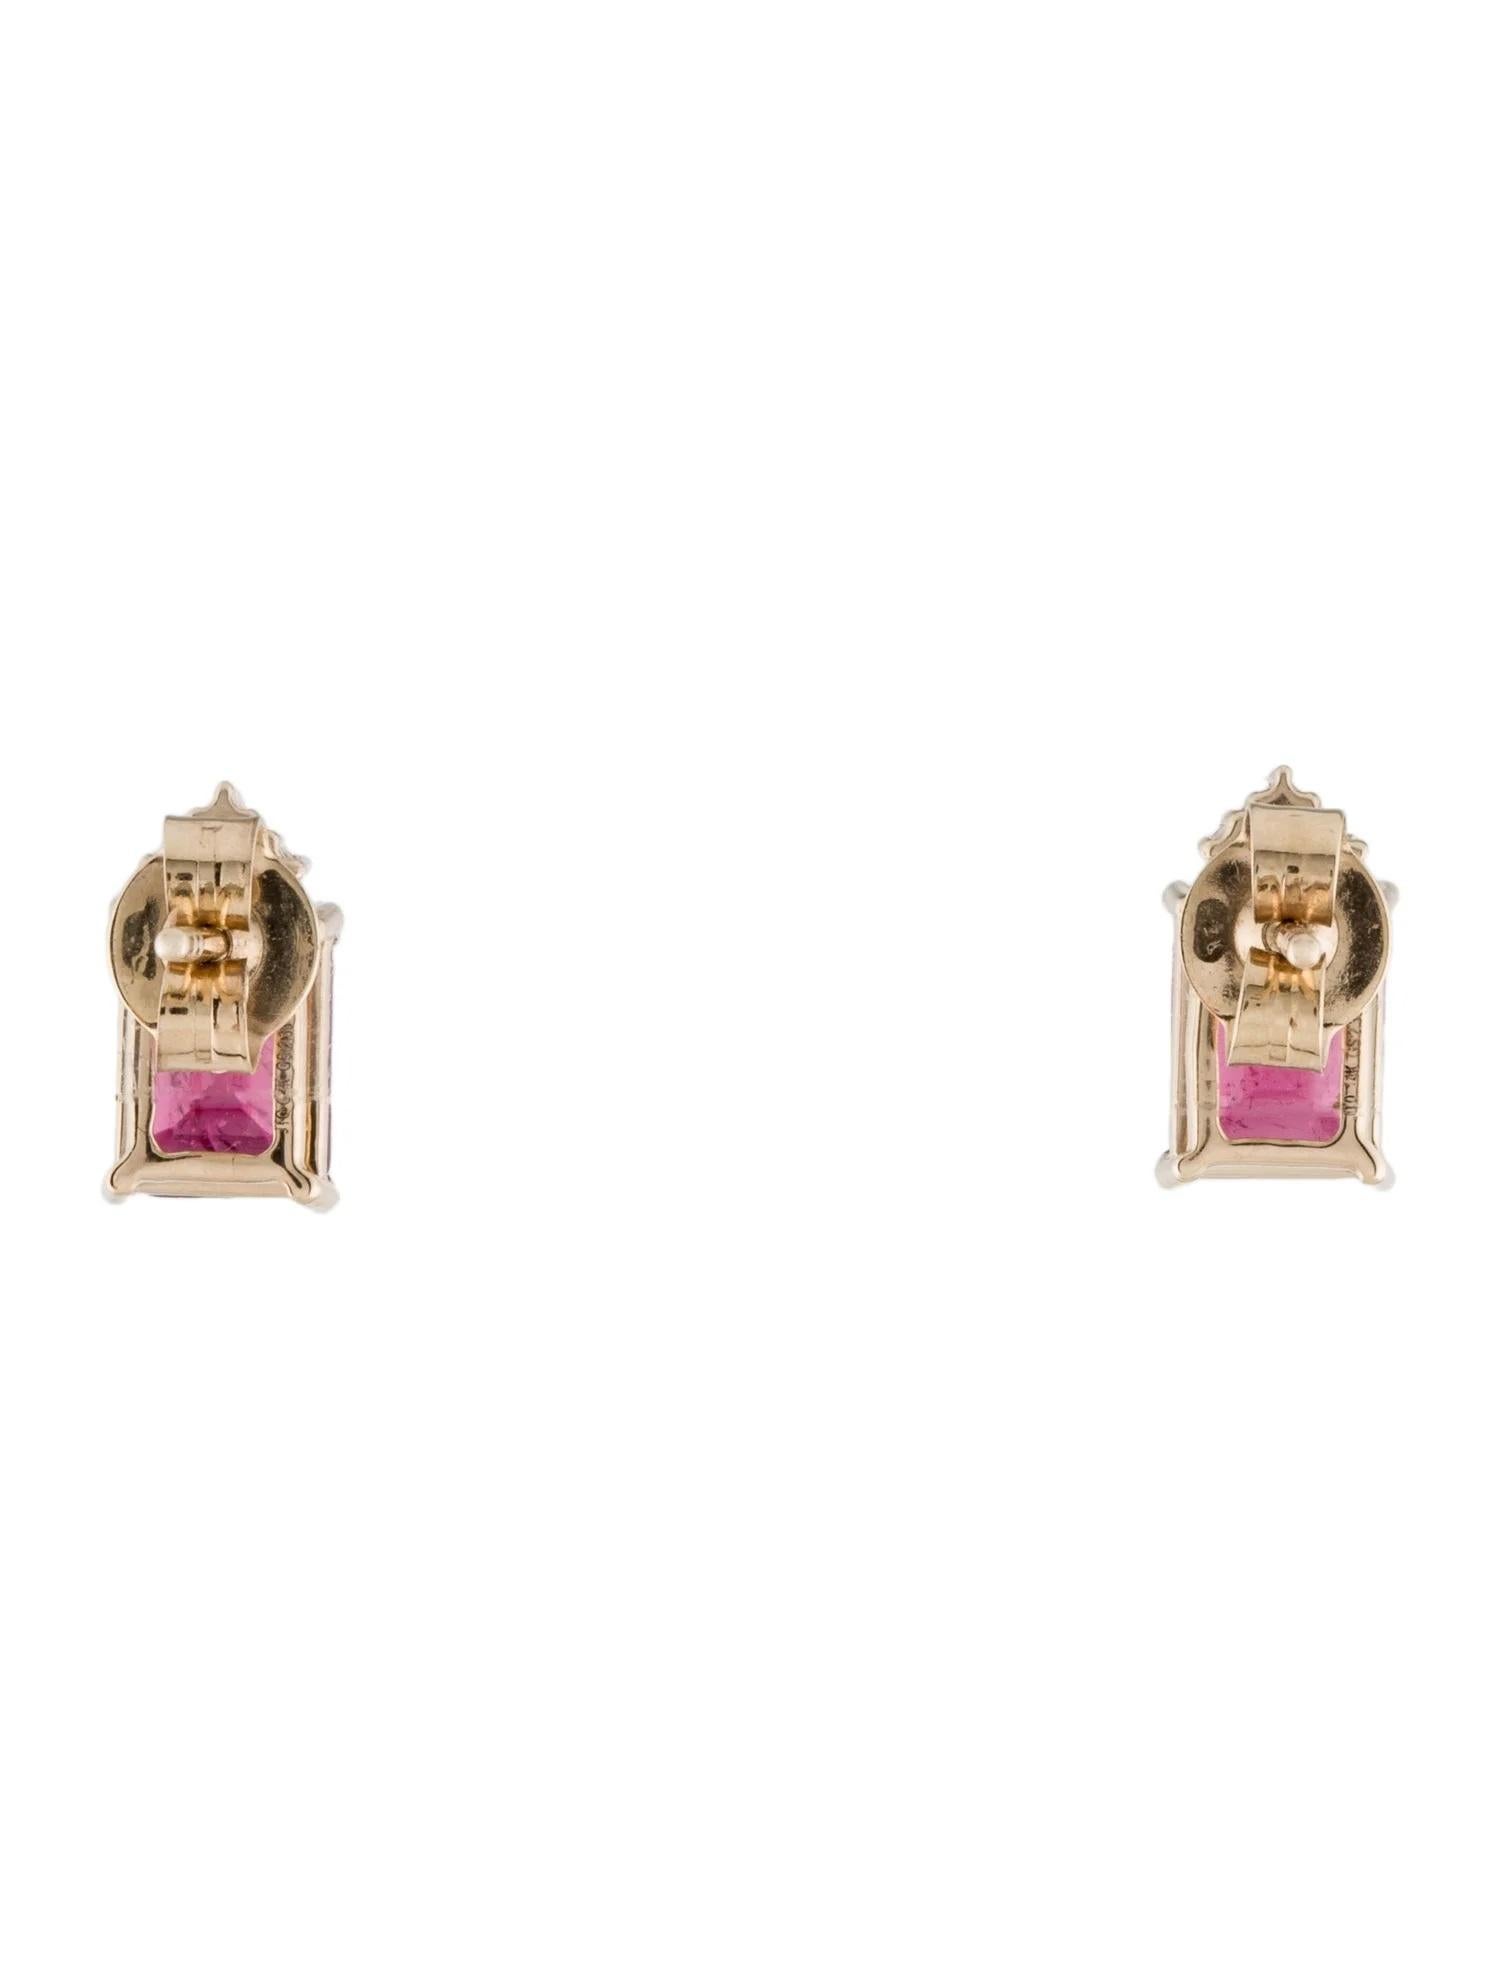 Elevate your style with these exquisite 14K Tourmaline & Diamond Stud Earrings. Crafted in luxurious yellow gold, each earring features a stunning 2.33 carat cut-cornered rectangular step-cut tourmaline in a vibrant pink hue. The tourmalines are